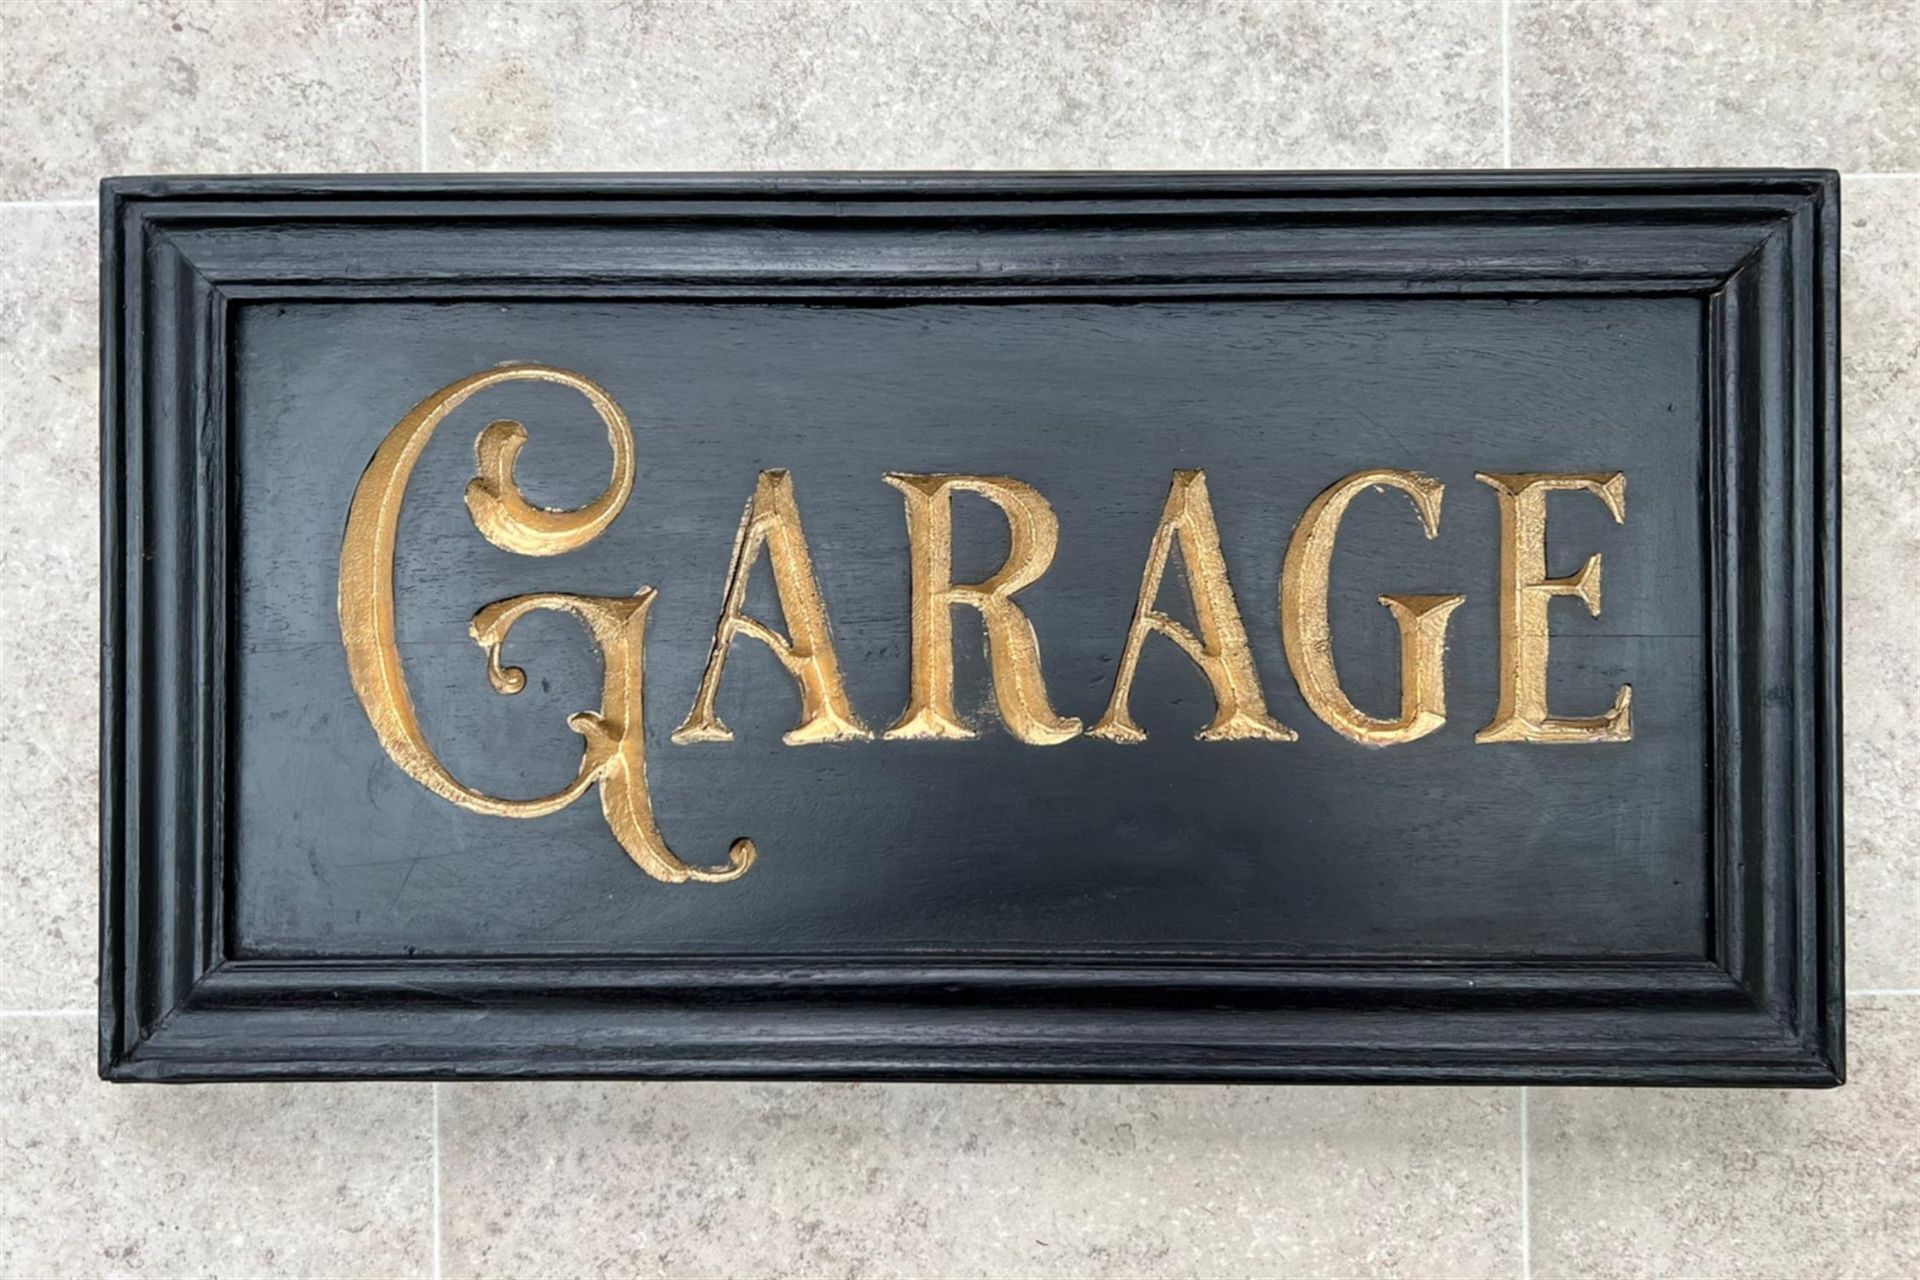 A Beautiful Hand-Carved Wooden 'Garage' Wall Sign